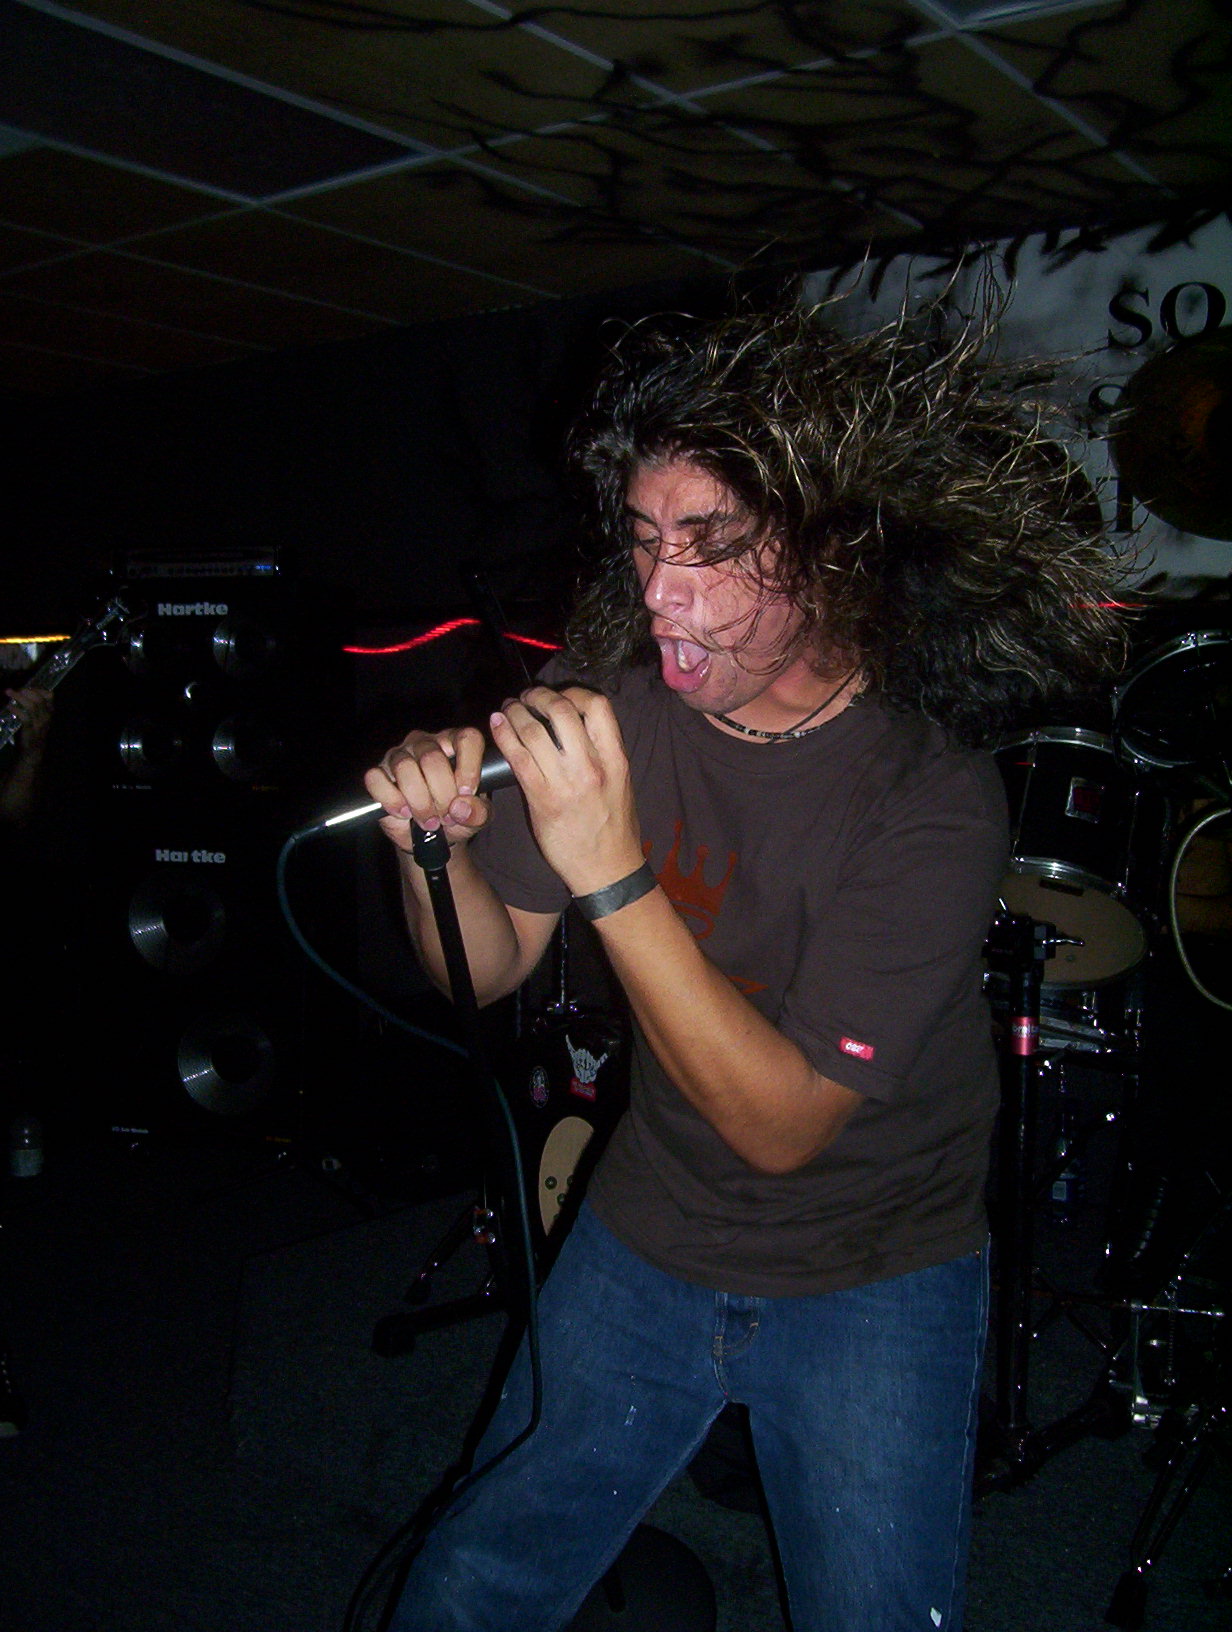 Michael Ibarra performing with Osiris Rising at Solid Sound Studios Pompano Beach, FL - July 2004 - Photo by Ali Harris